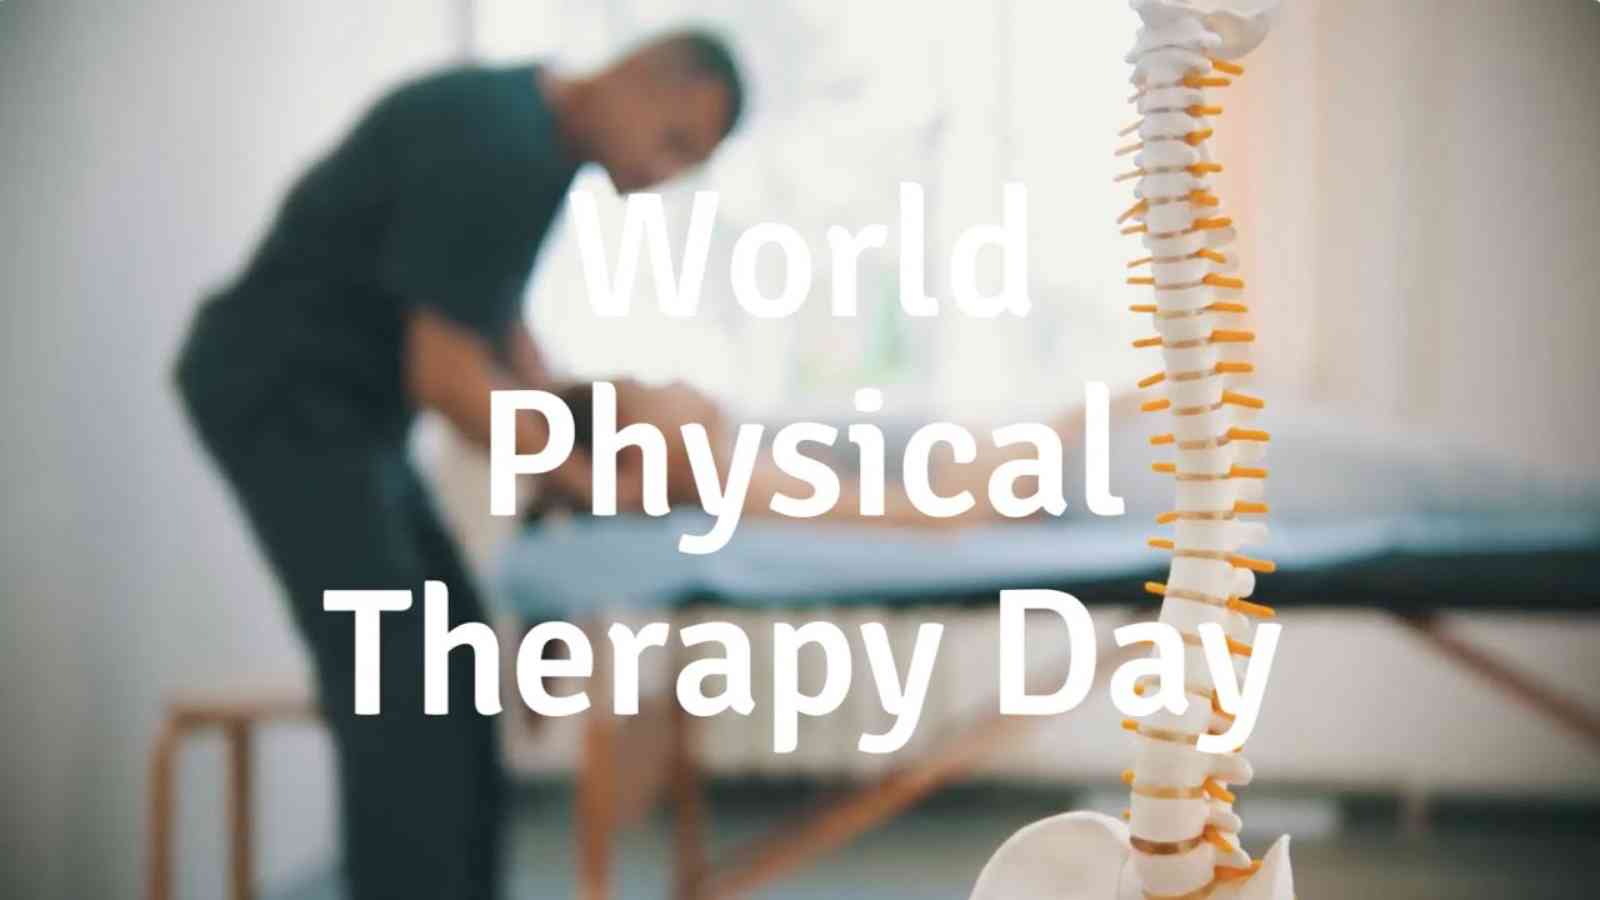 World Physical Therapy Day 2022: Date, History and Significance